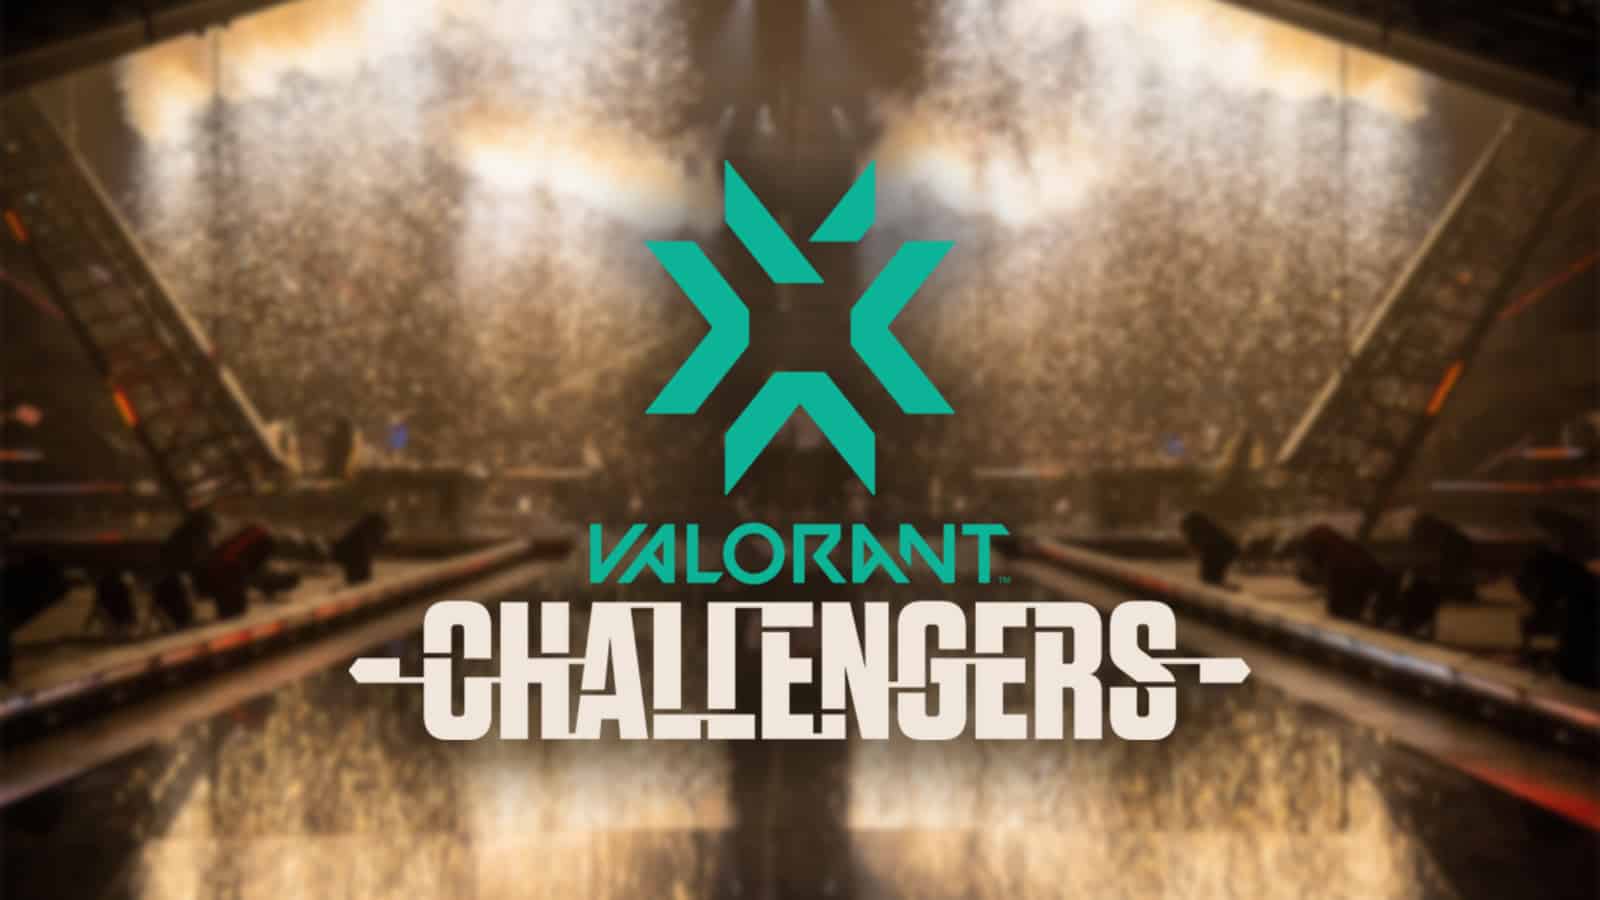 Valorant Stage 1 Challengers 2022 logo on stage background from Valorant Champions 2021